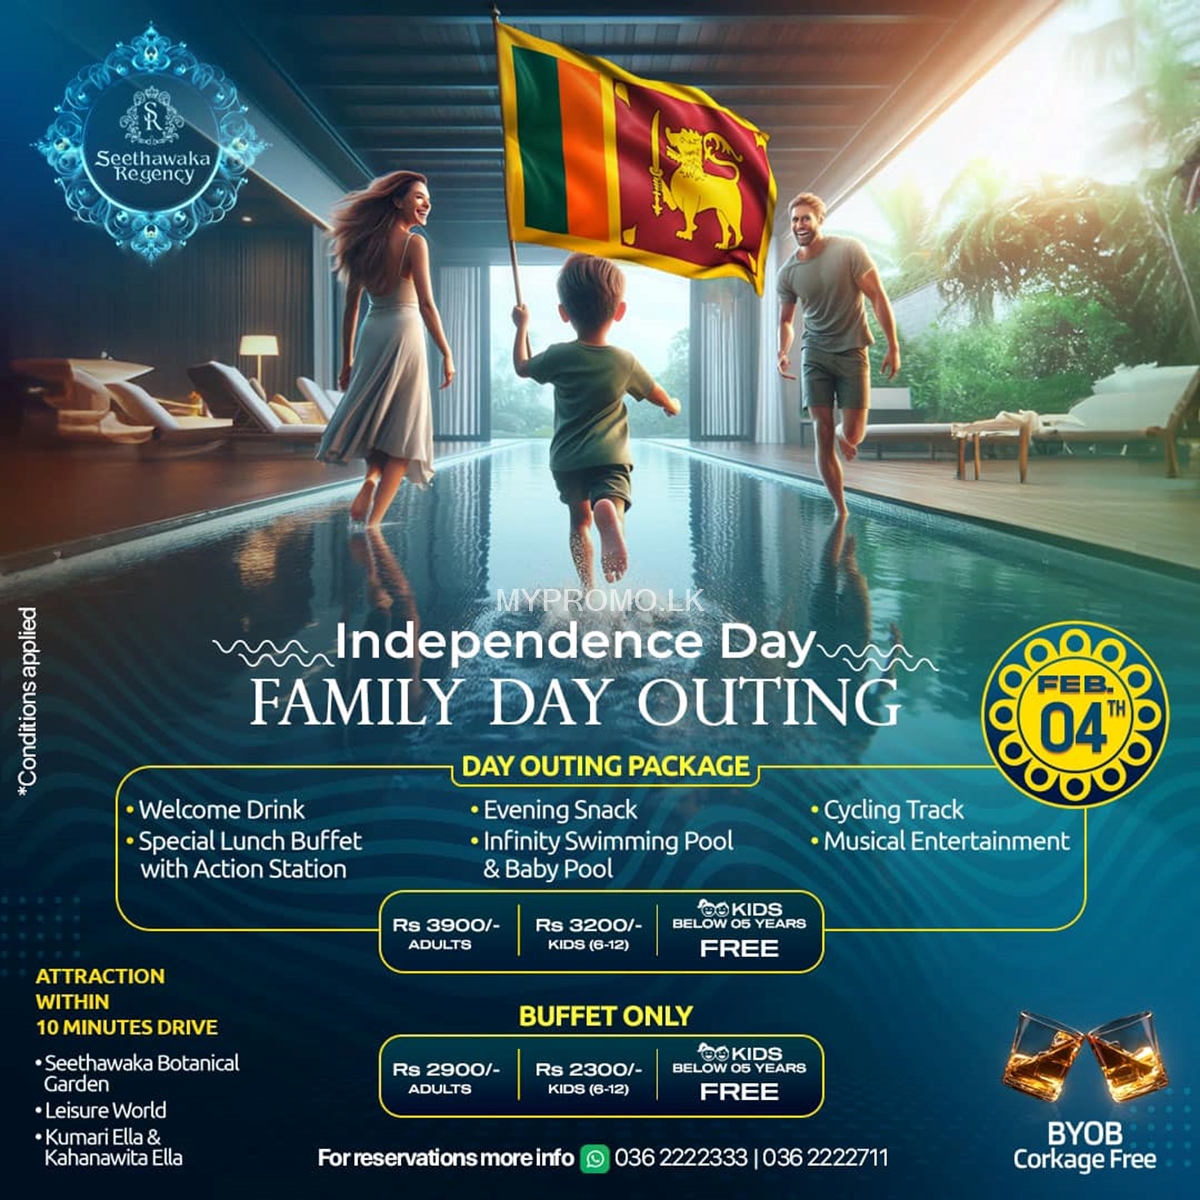 Join us this Independence Day for a memorable outing with your loved ones at Seethawaka Regency